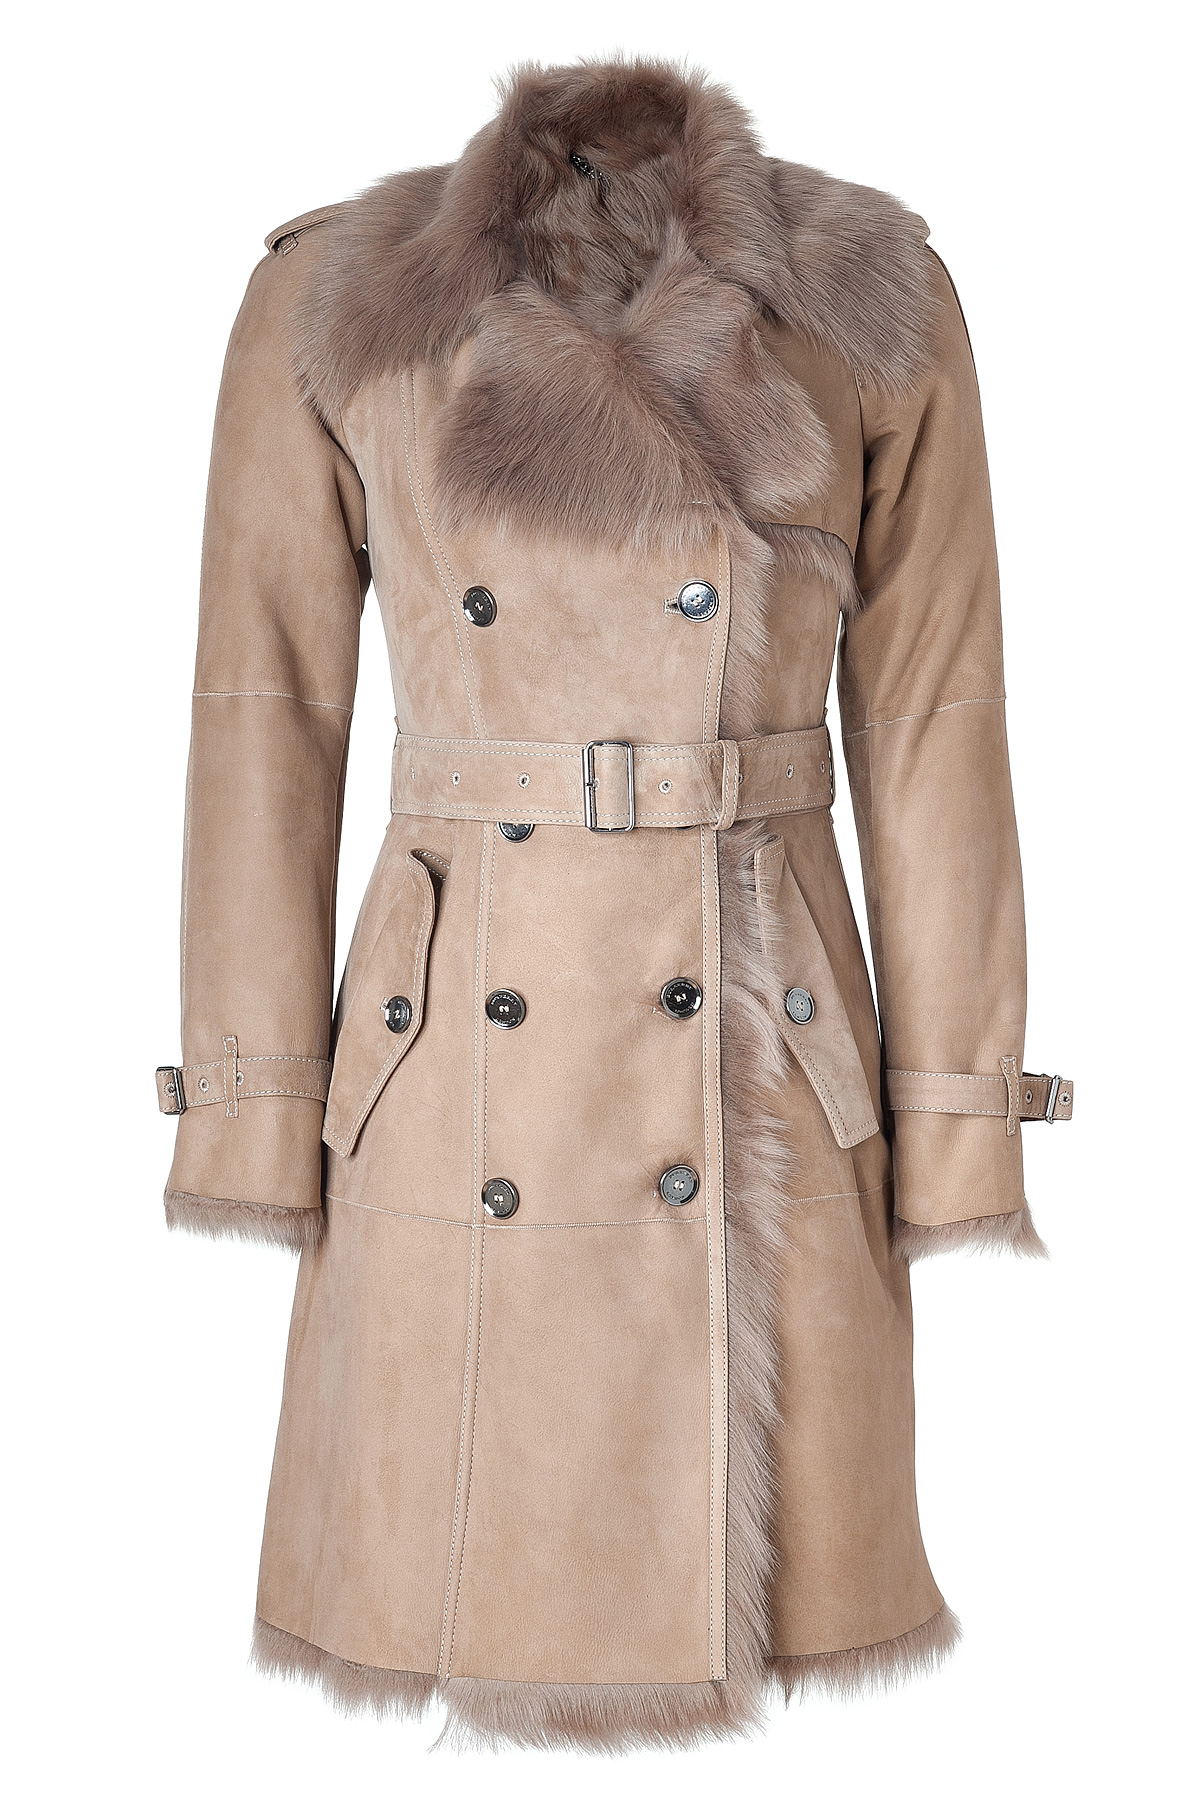 Lyst - Burberry Belted Shearling Hadston Coat in Brown